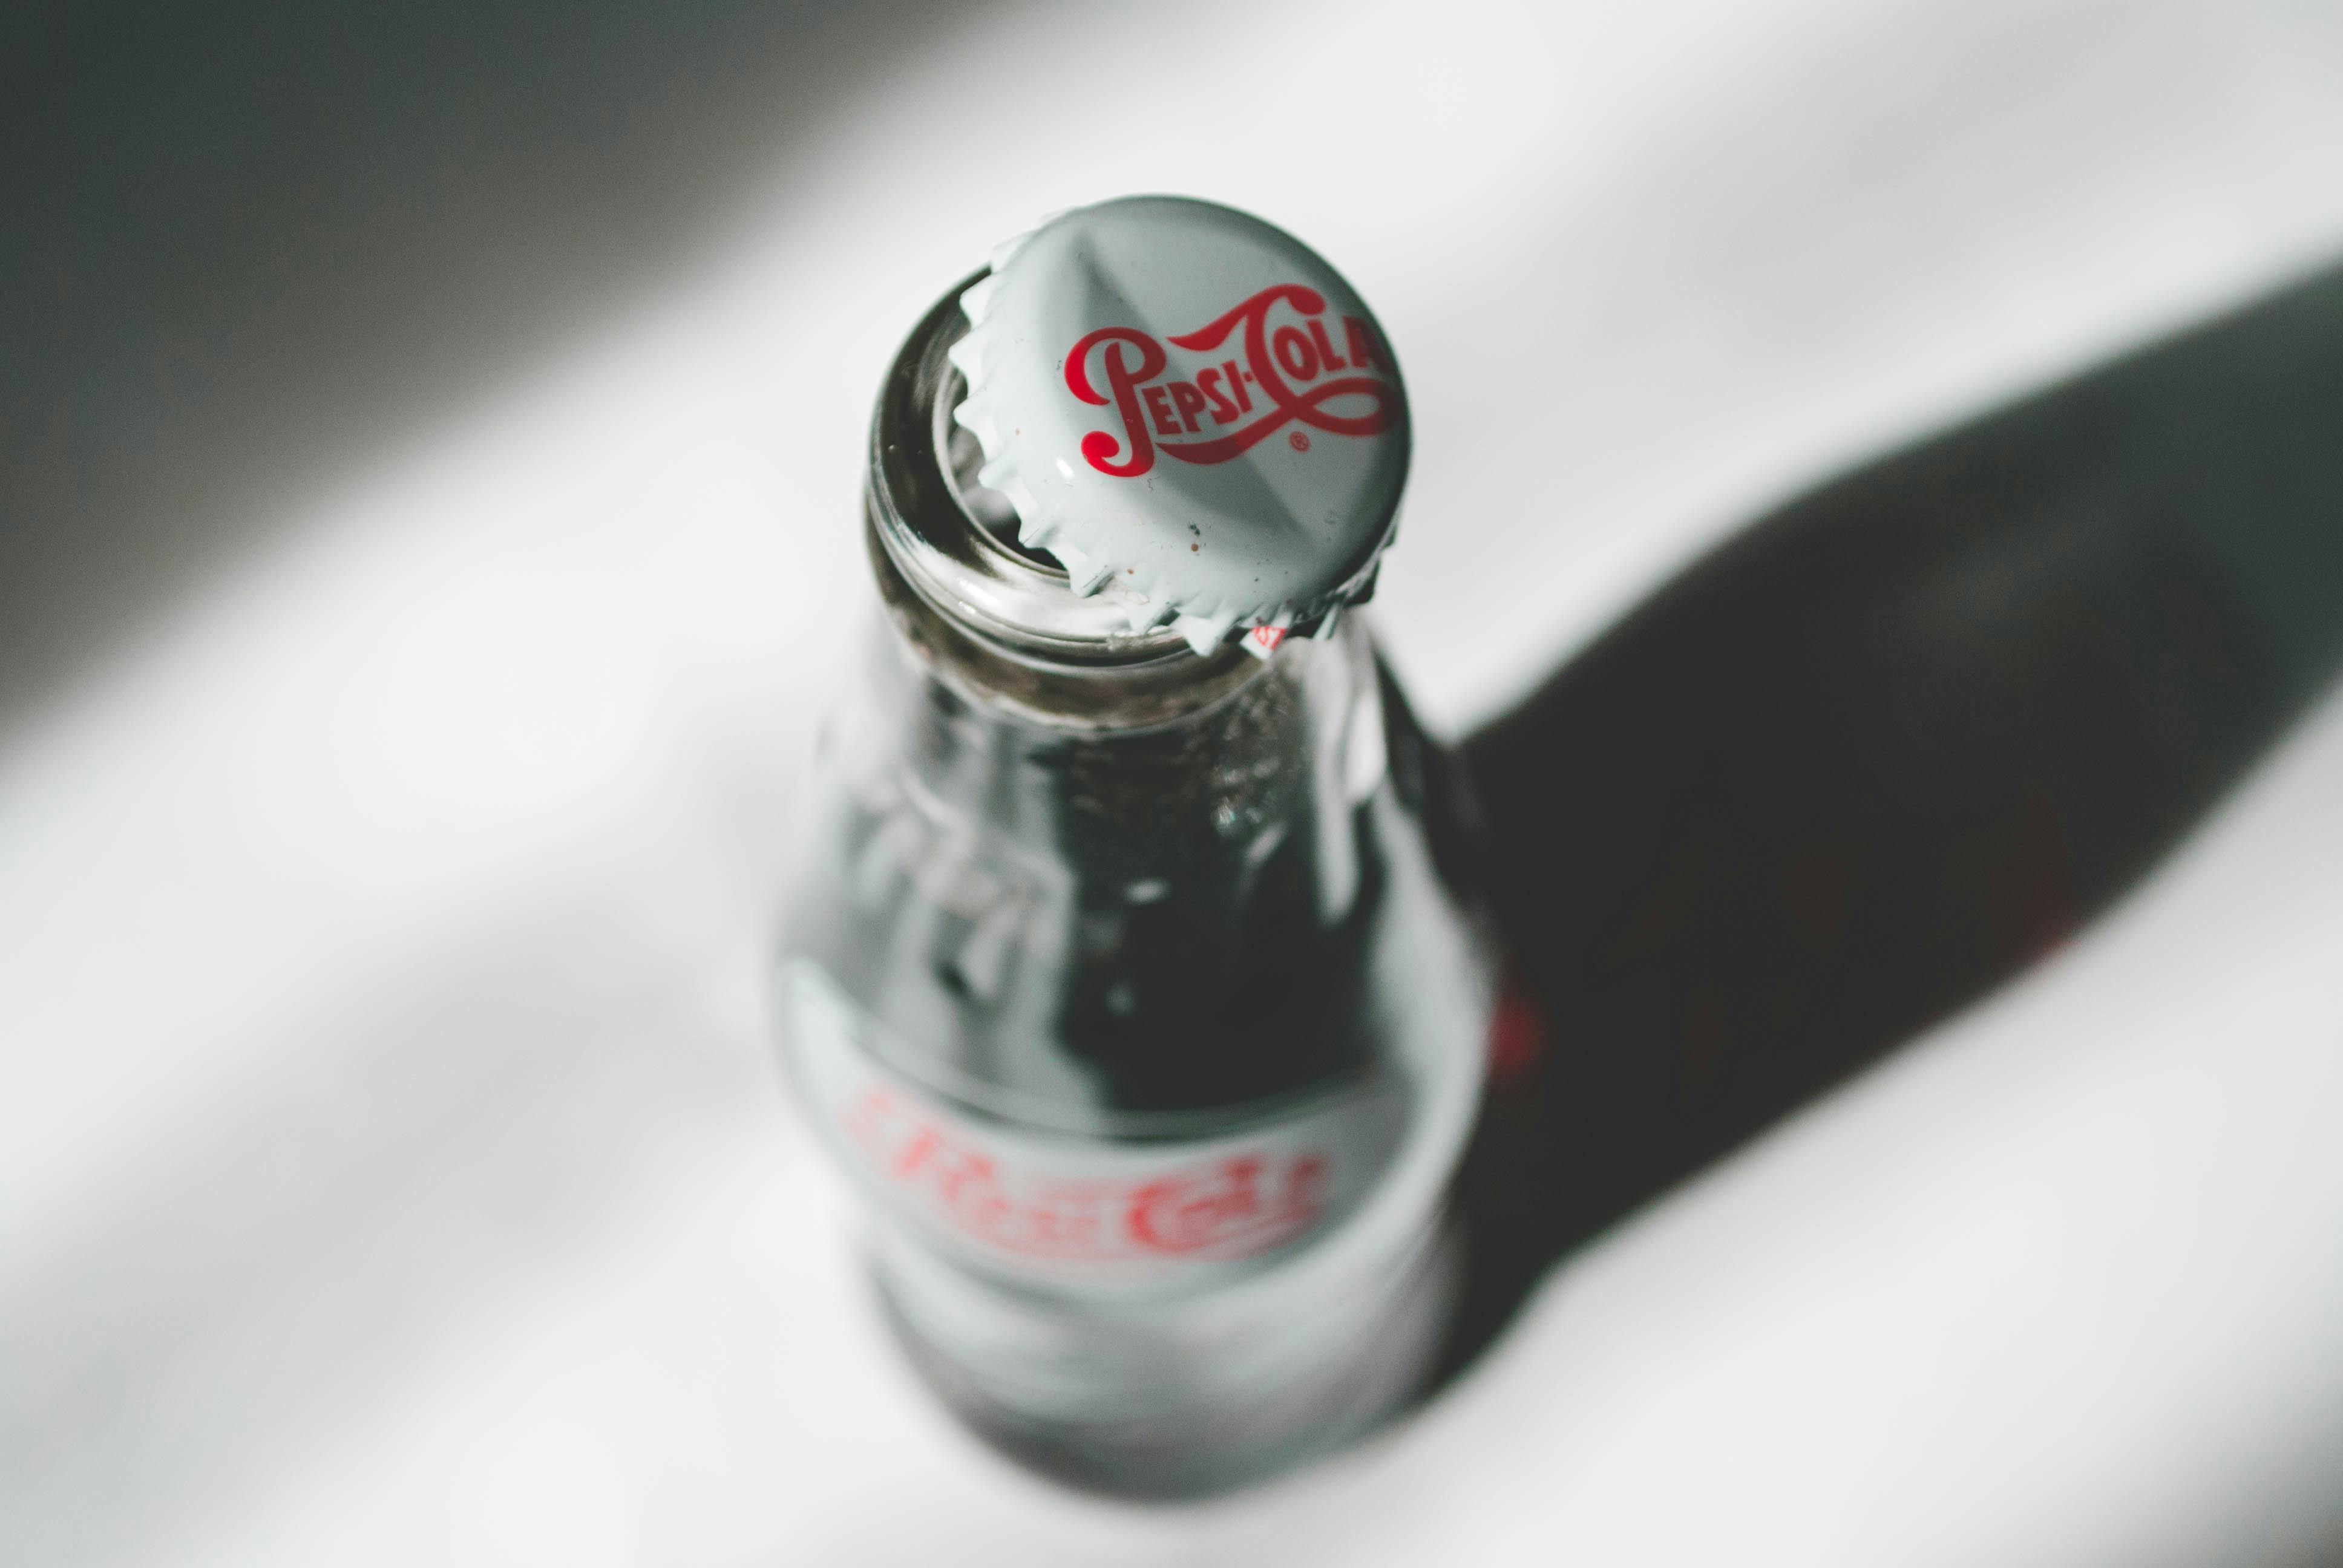 Can And Glass Of Pepsi Cola Stock Photo - Download Image Now